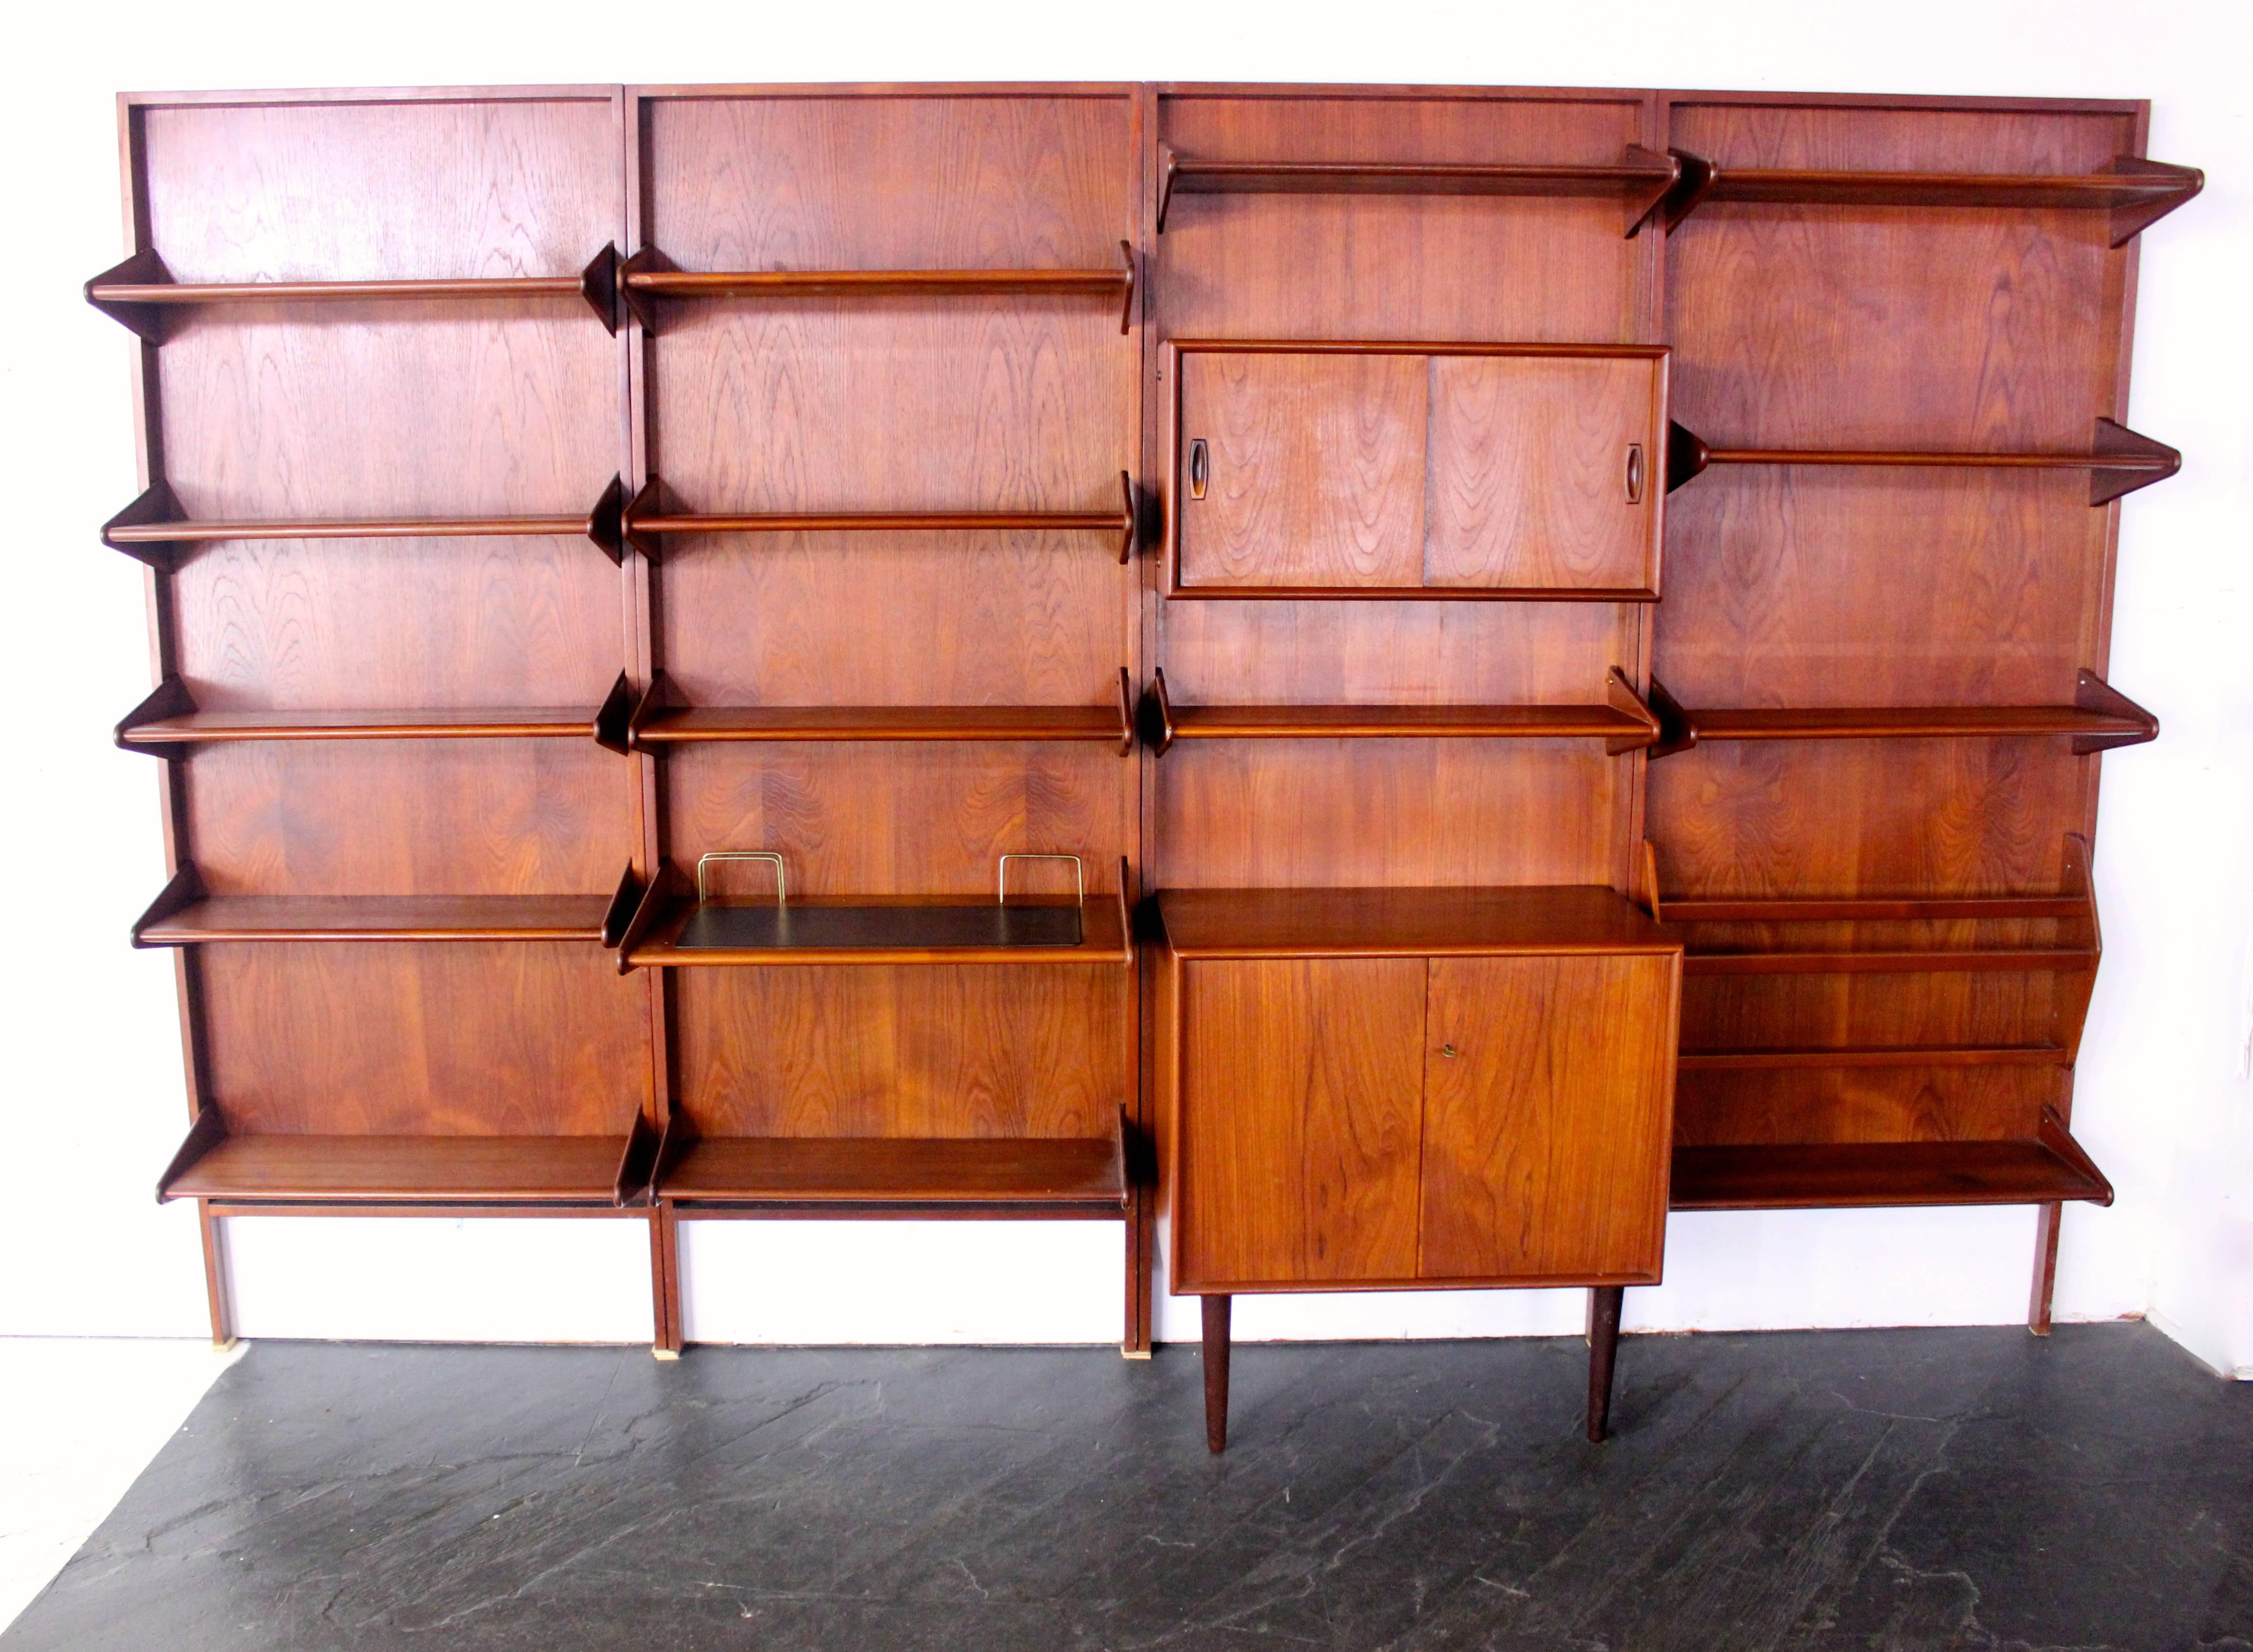 Danish modern wall-mounted unit designed by Arne Hovmand Olsen.
Impressive storage and display capacity in richly grained teak.
Features: Four bays with wall-mounted back panels, one locking cabinet and smaller cabinet with sliding doors, desktop